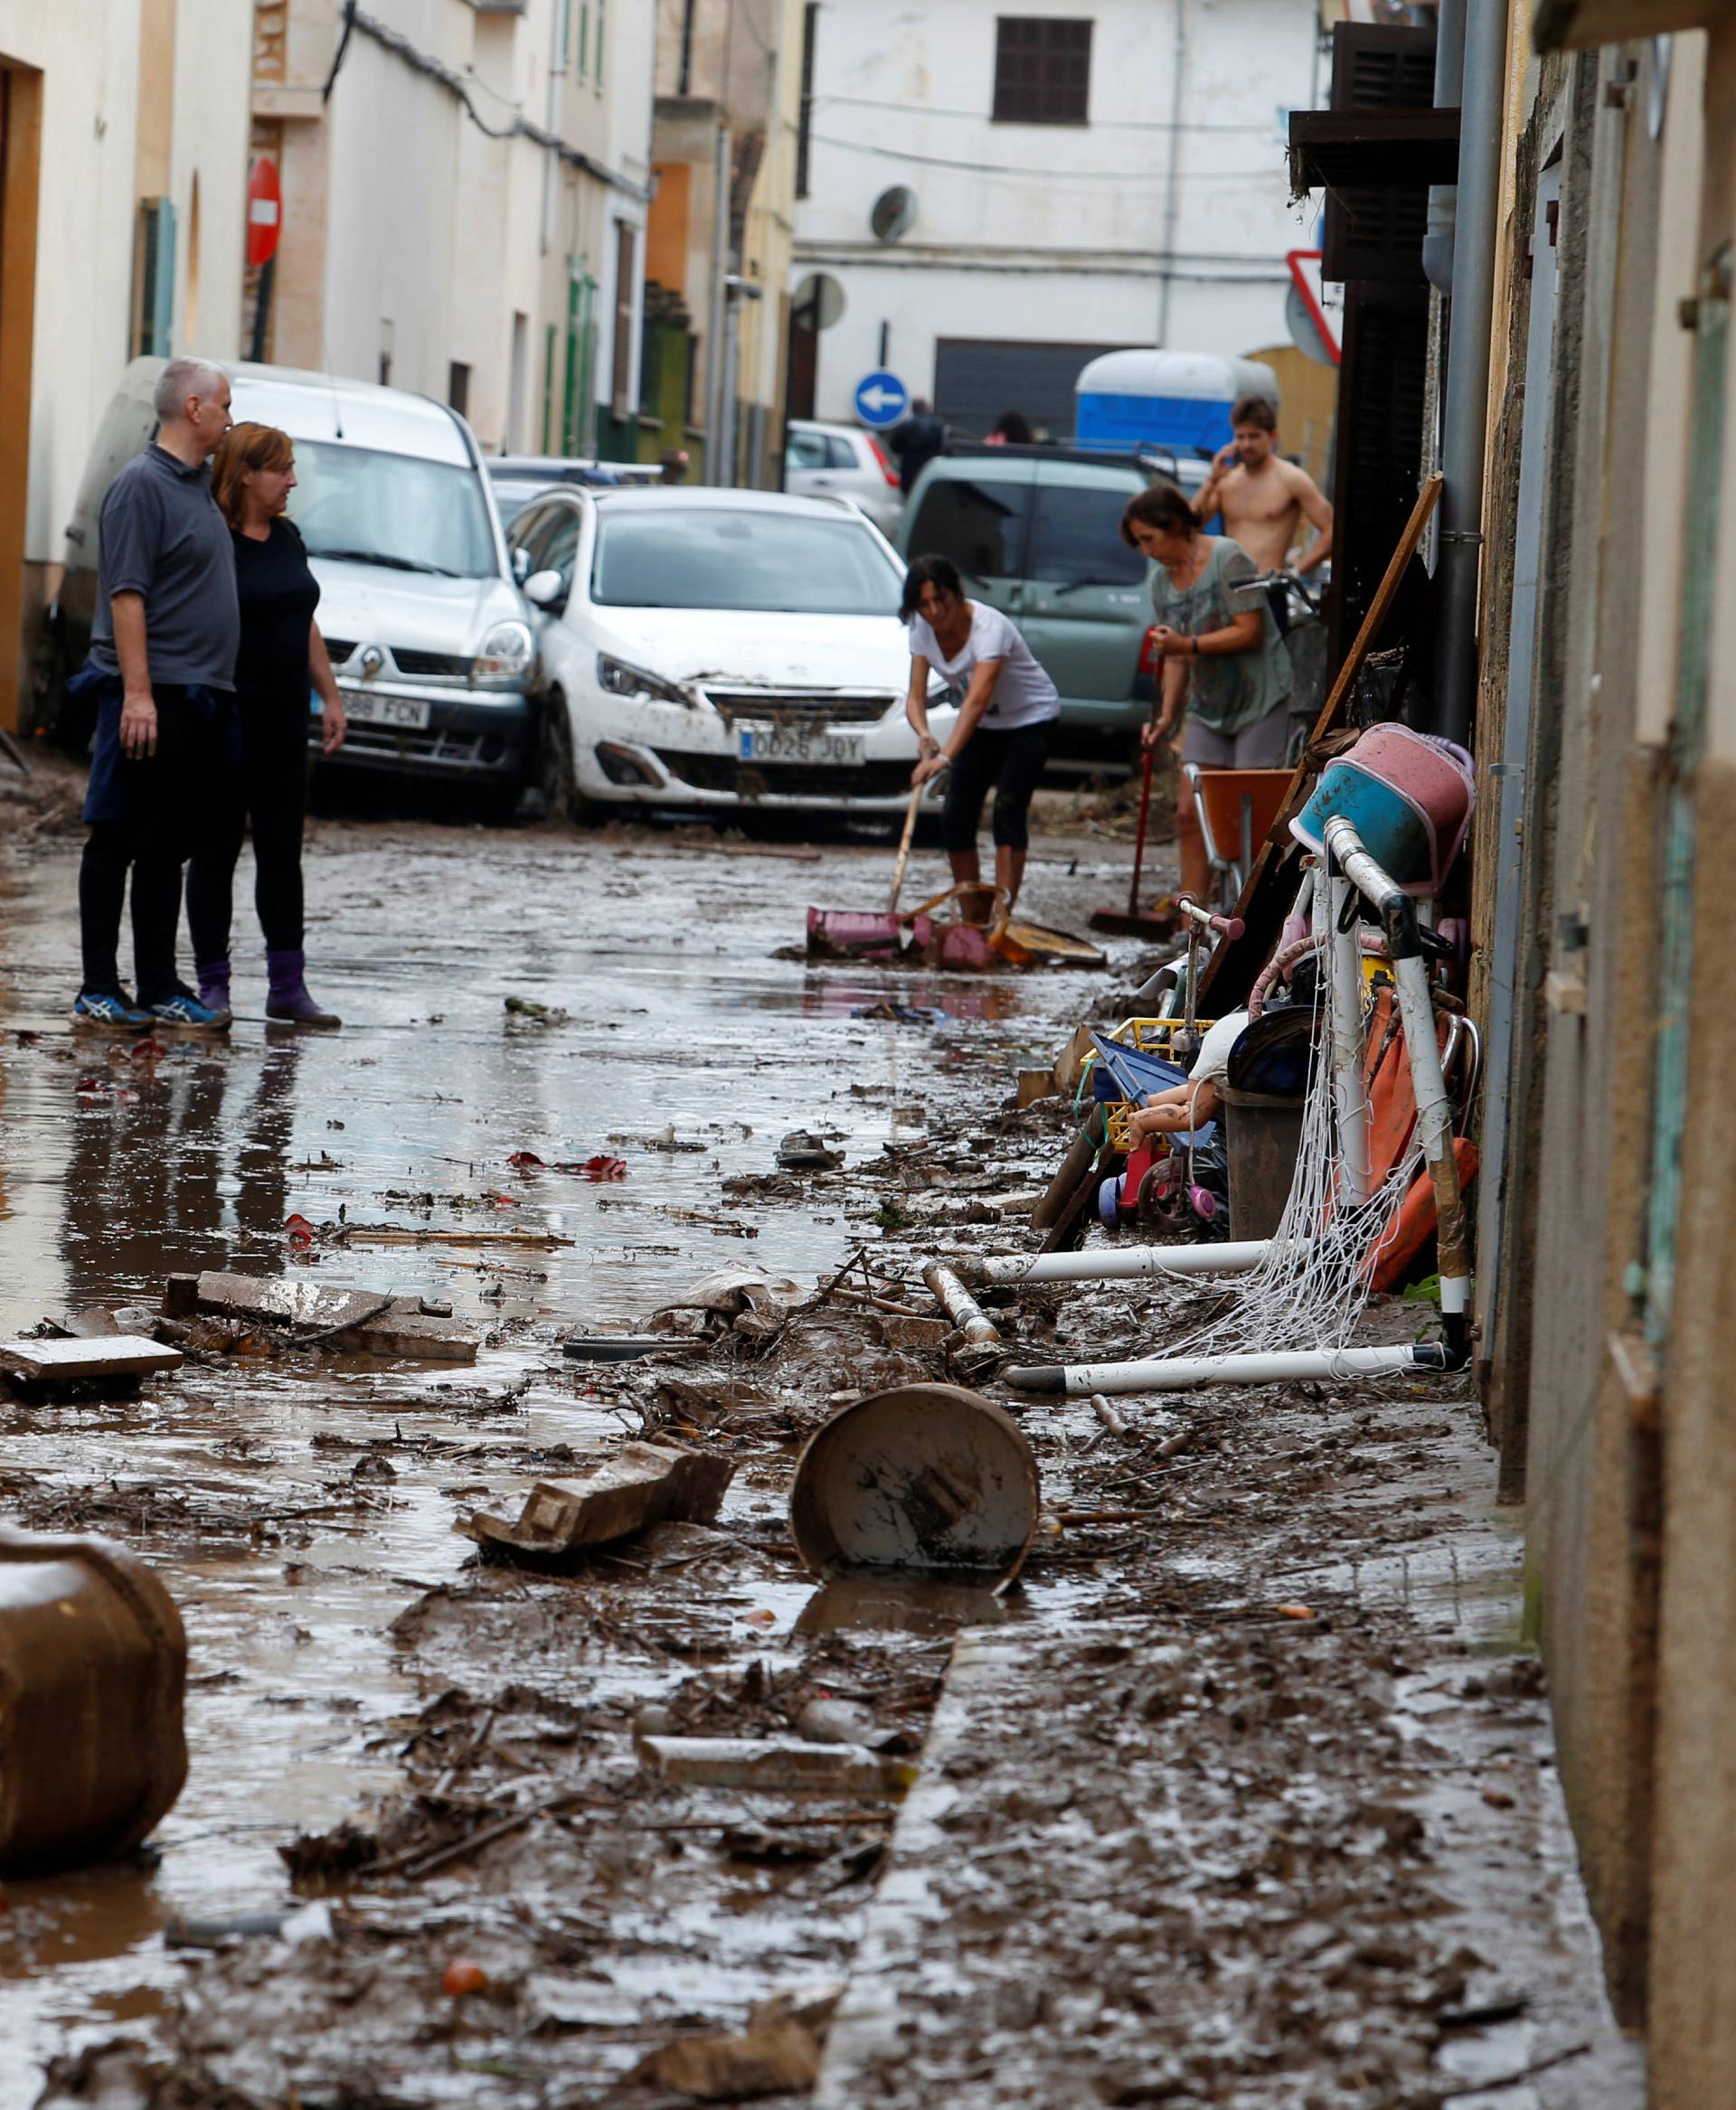 People clean the debris as heavy rain and flash floods hit Sant Llorenc de Cardassar on the island of Mallorca